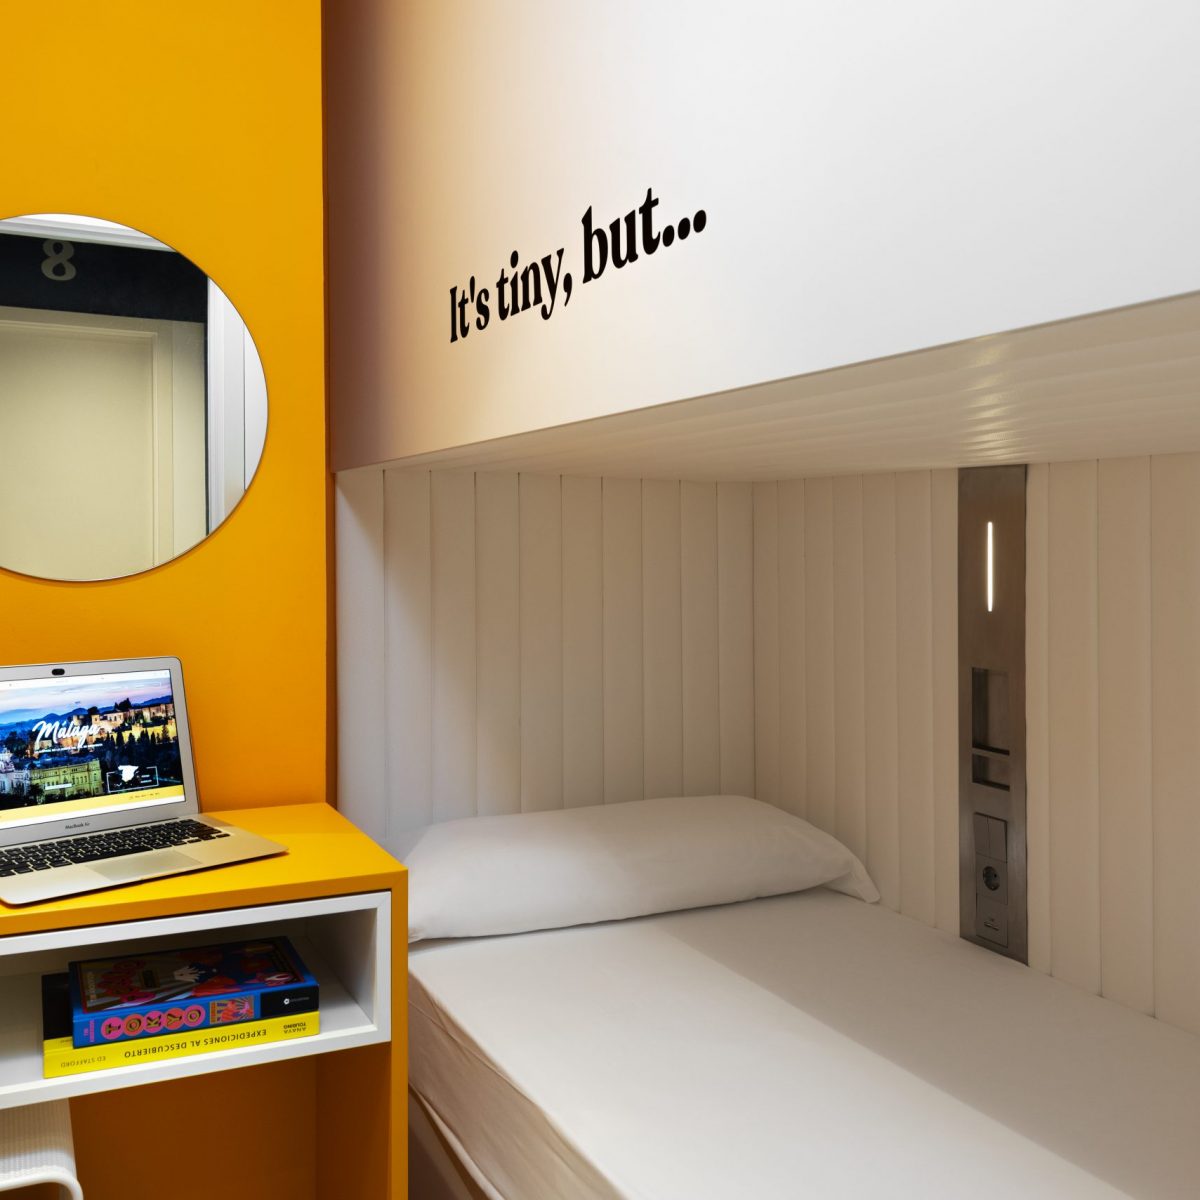 Hostel bedroom with a mirror over an orange wall and a computer on a table